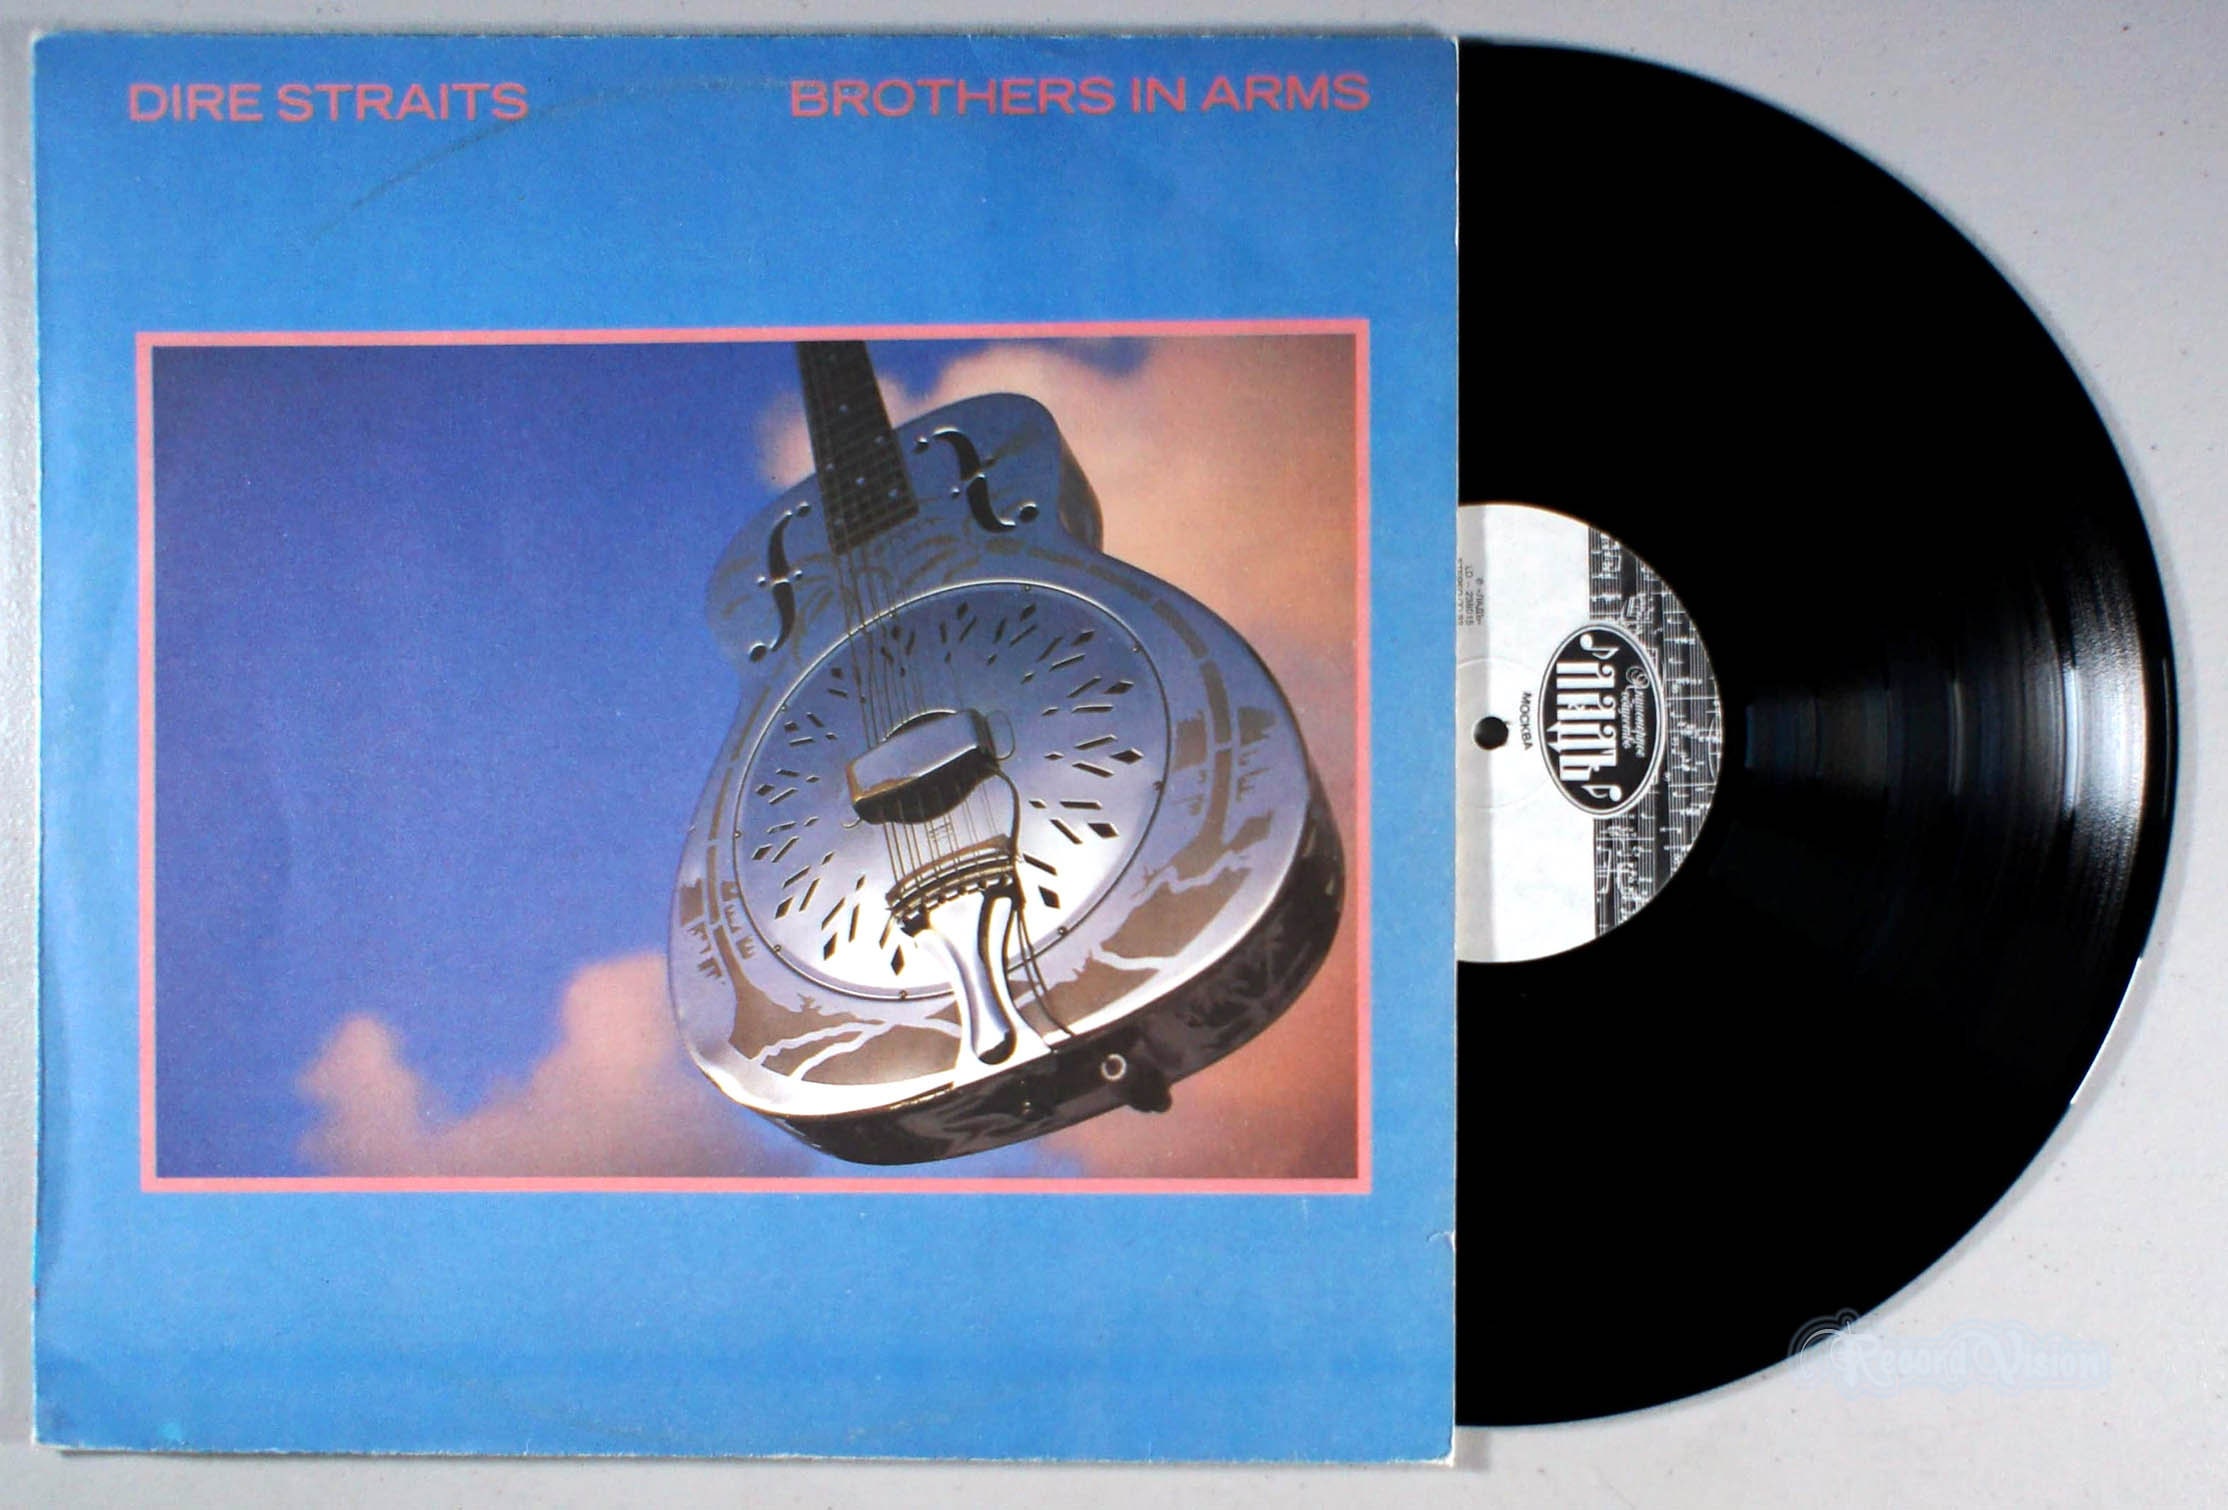 Dire Straits Brothers in Arms 1985 Vinyl LP so Far - Etsy